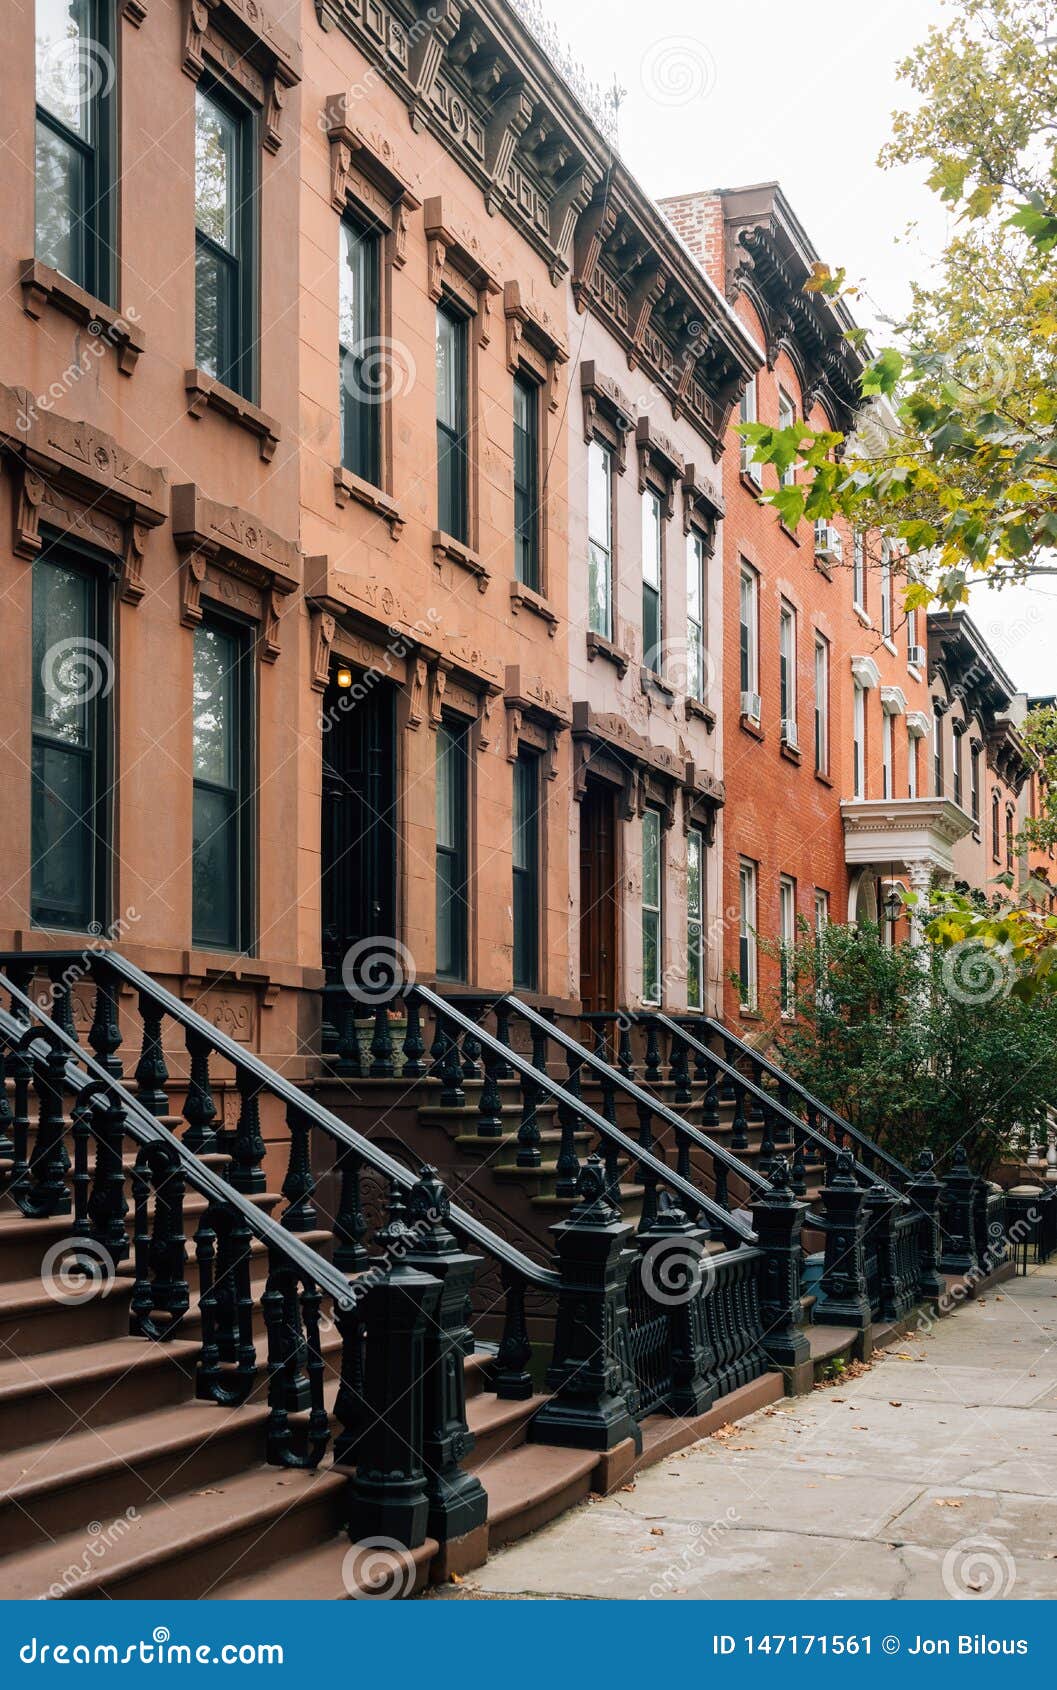 brownstones in greenpoint, brooklyn, new york city